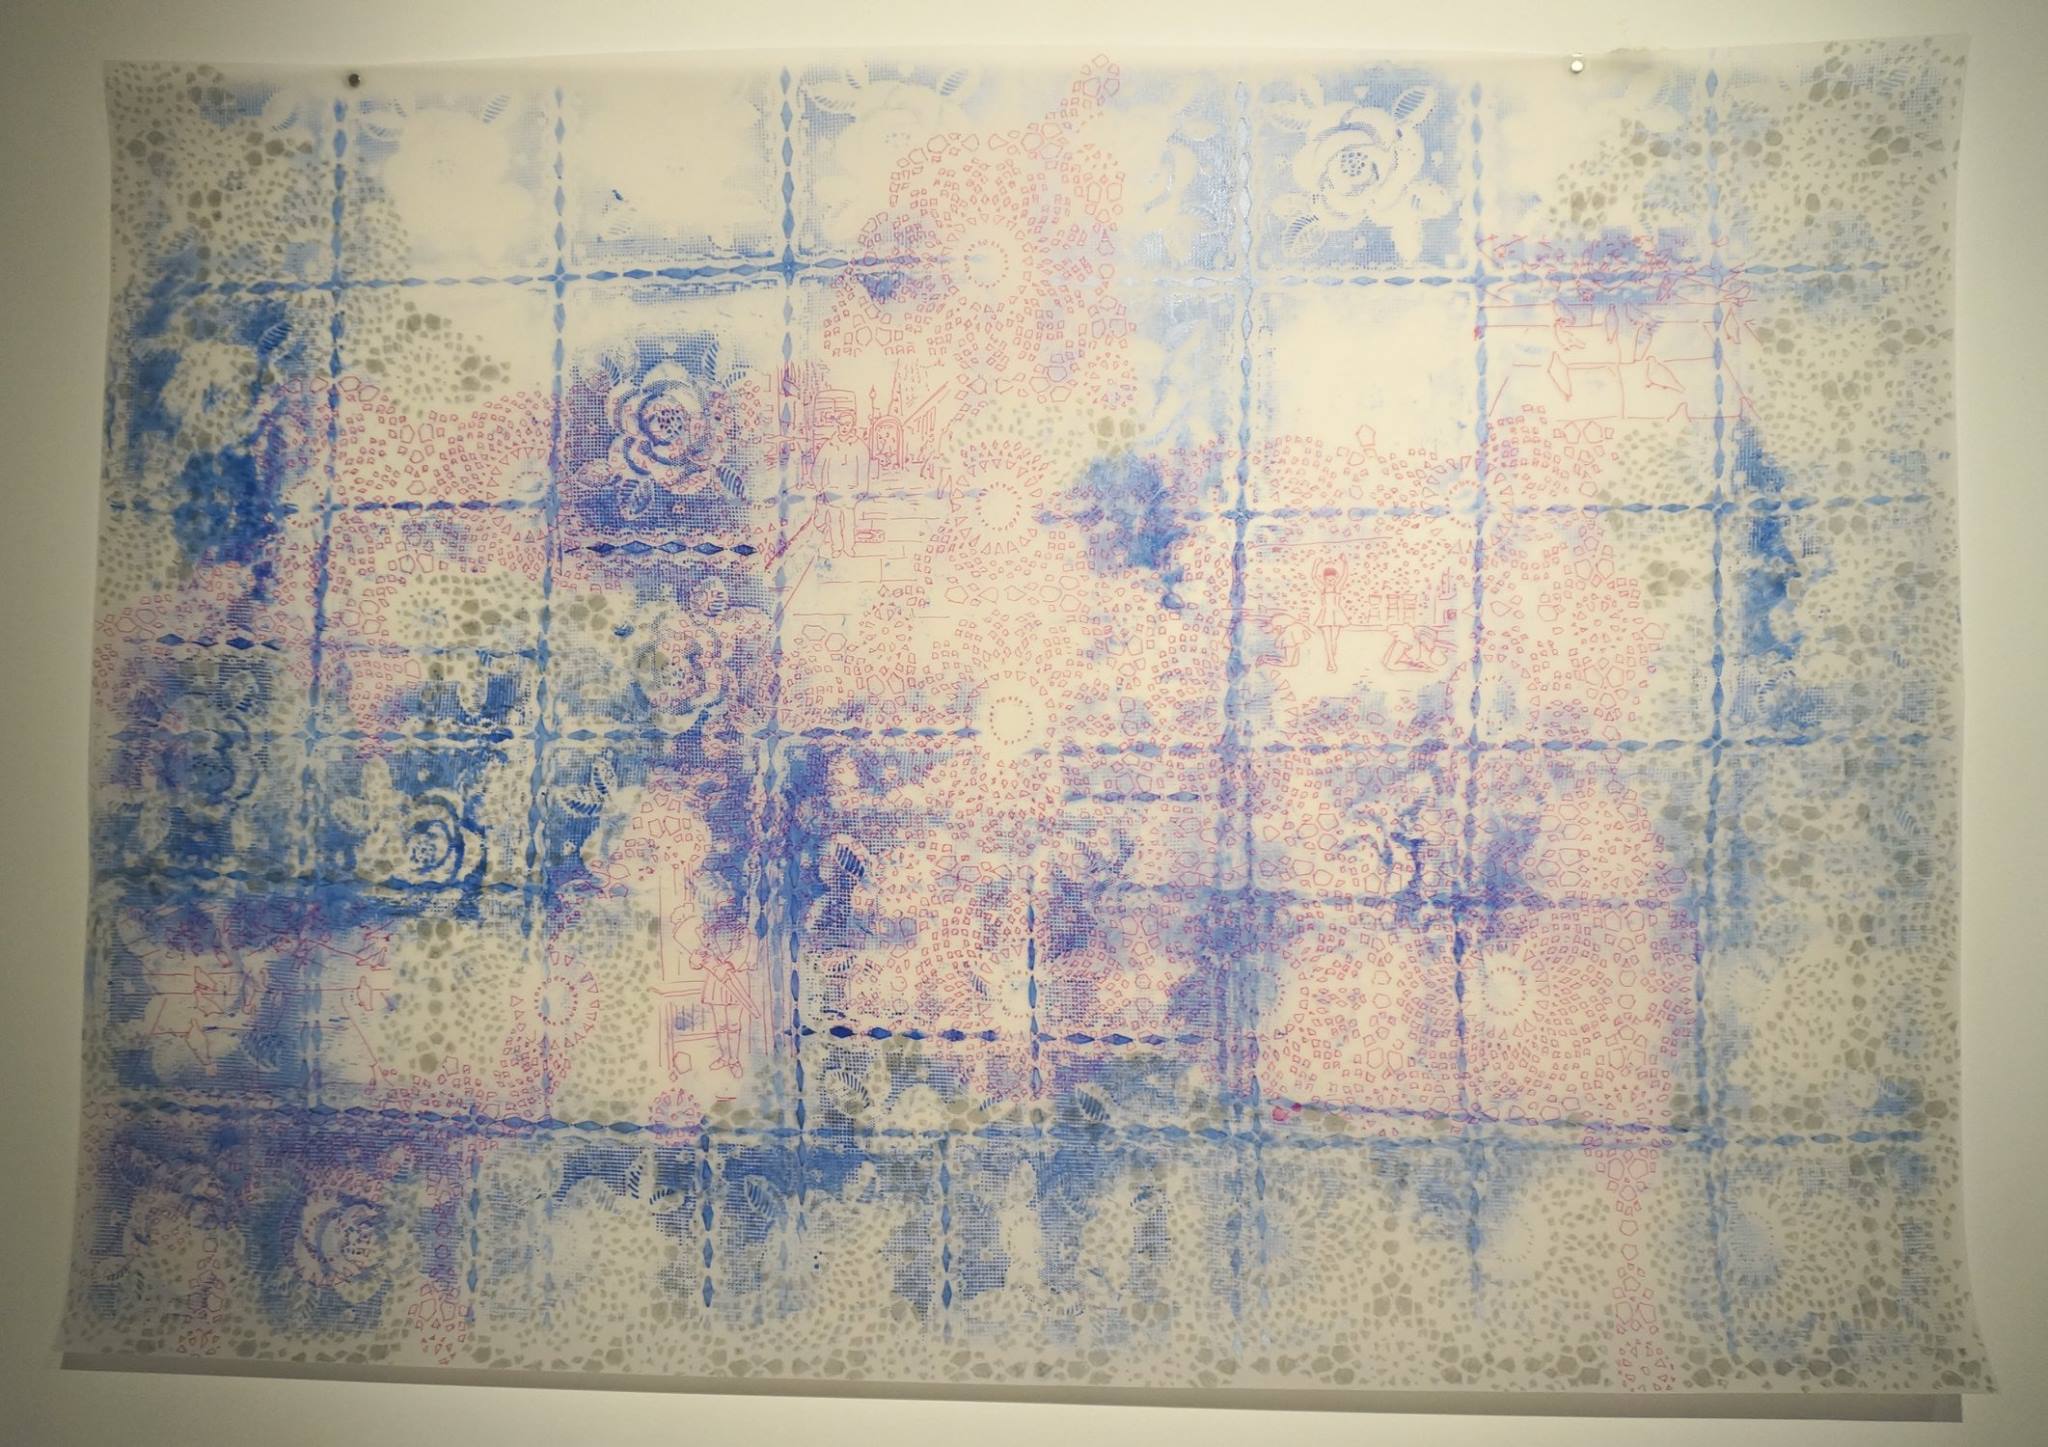 Retrospectacle, 2014-2015, serie of 5 drawings, marker on parchment paper (oil, horsehair), variable dimensions